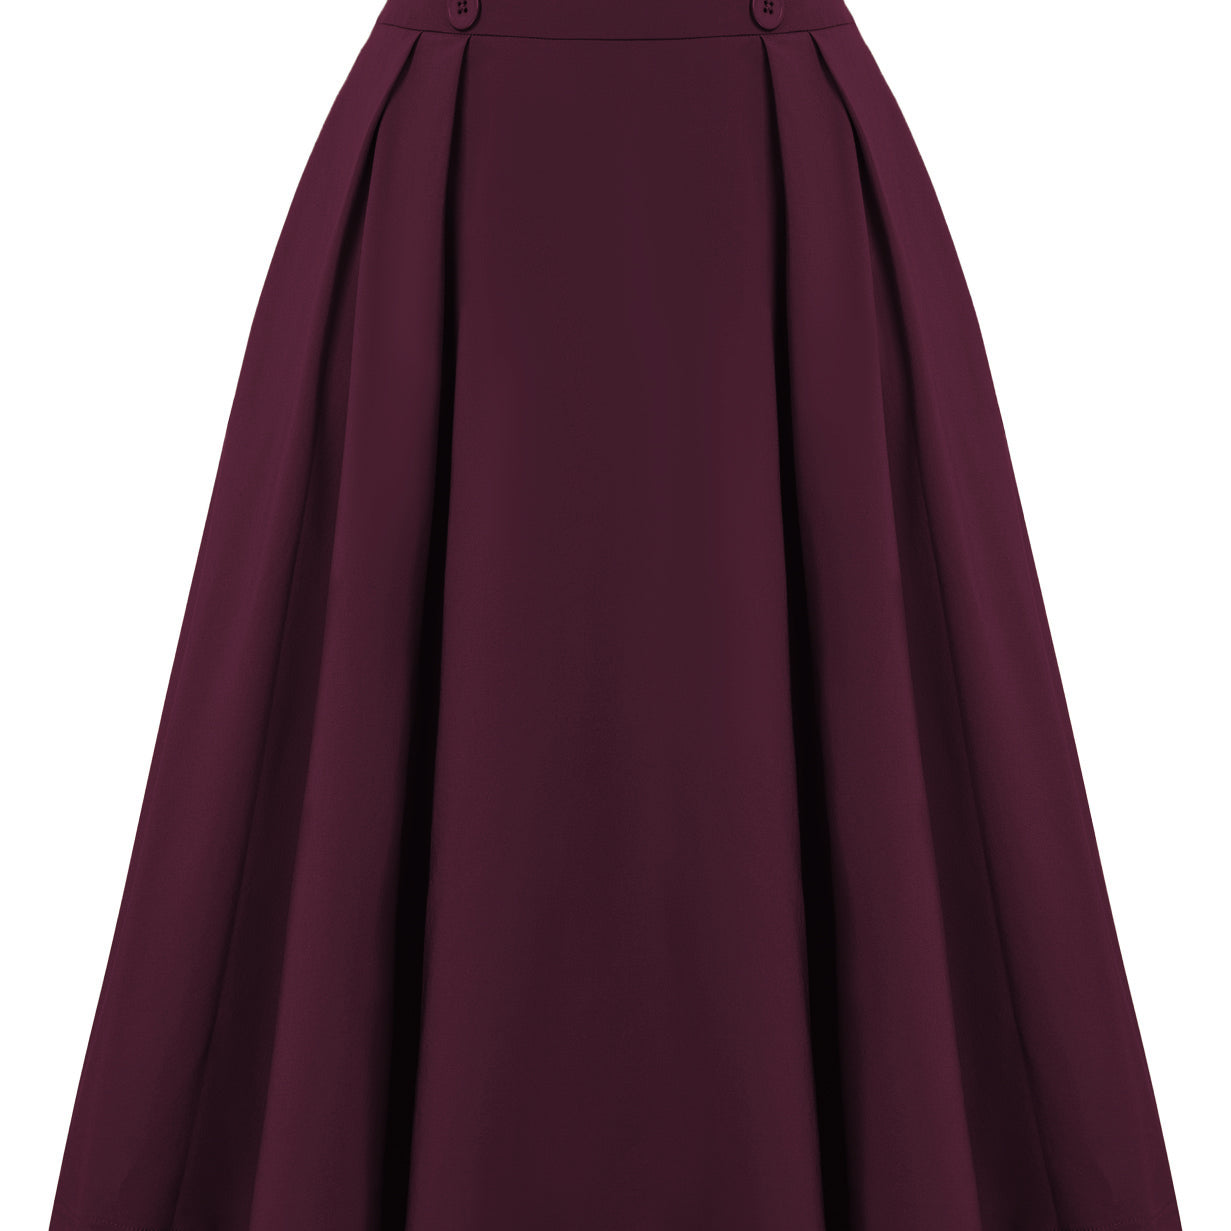 Pleated Buttons Decorated Elastic Waist High Waist Swing A-Line Skirt with Pockets